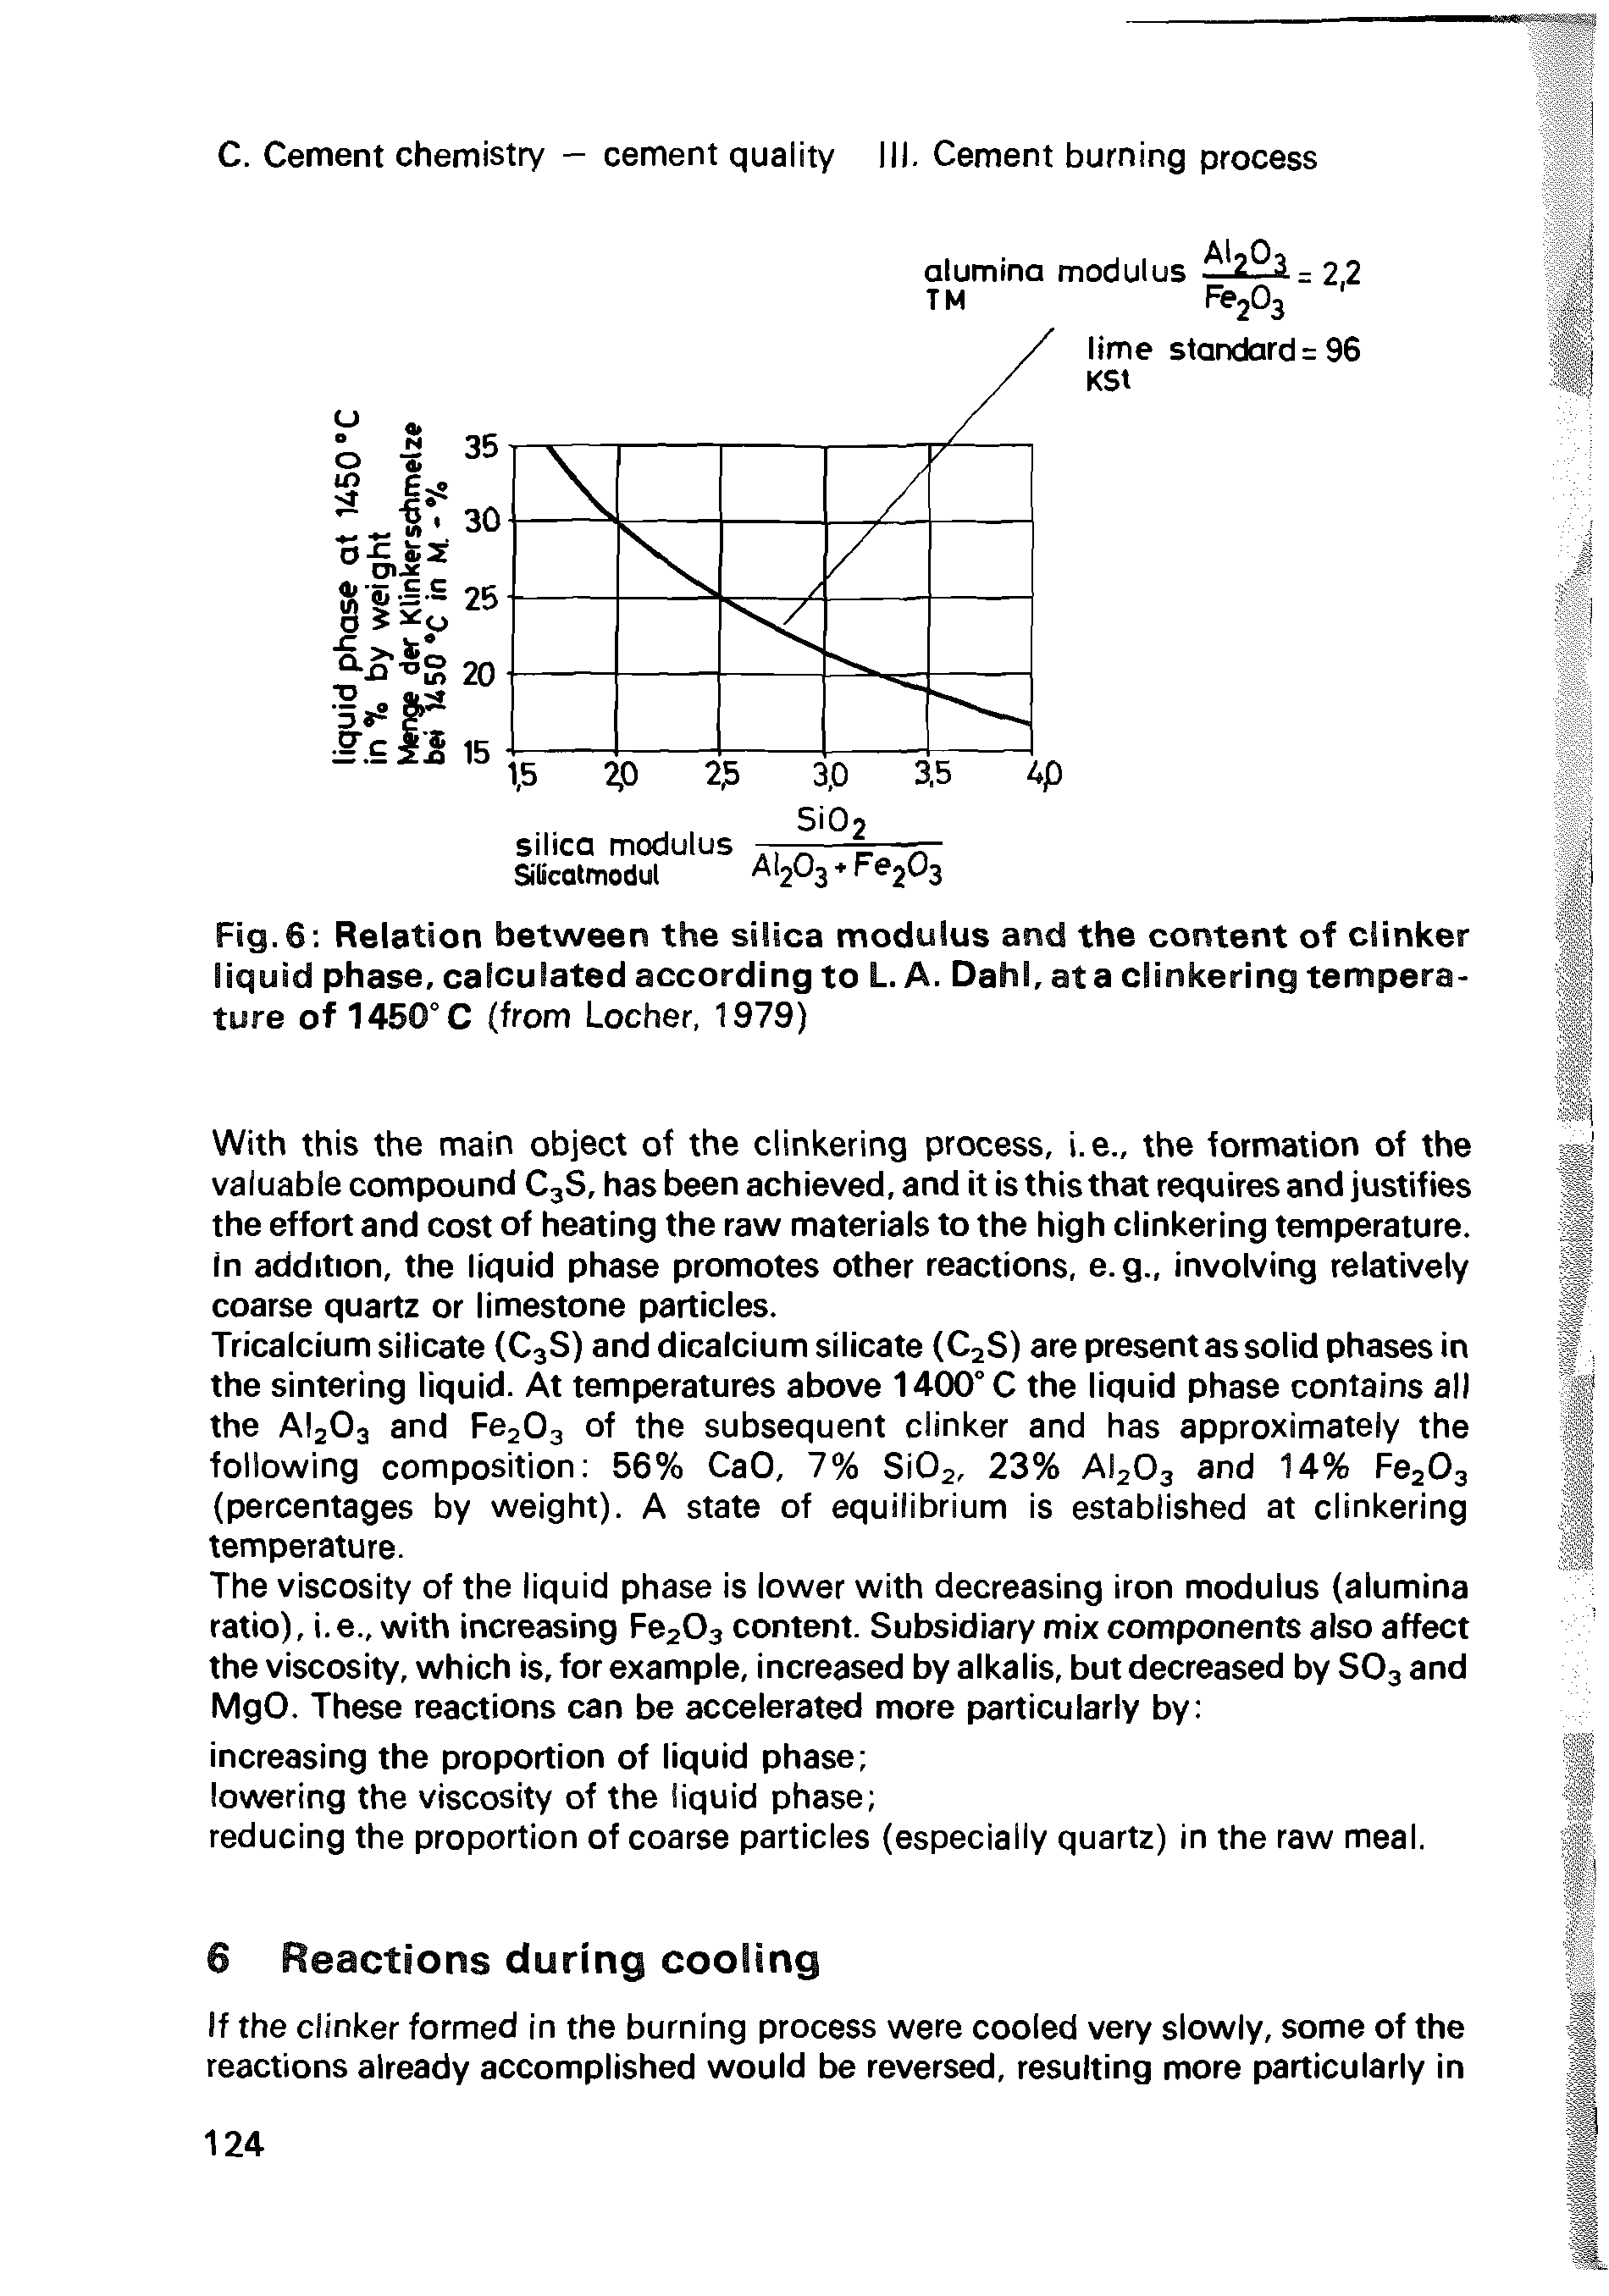 Fig. 6 Relation between the silica modulus and the content of clinker liquid phase, calculated according to L. A. Dahl, at a clinkering temperature of 1450° C (from Locher, 1979)...